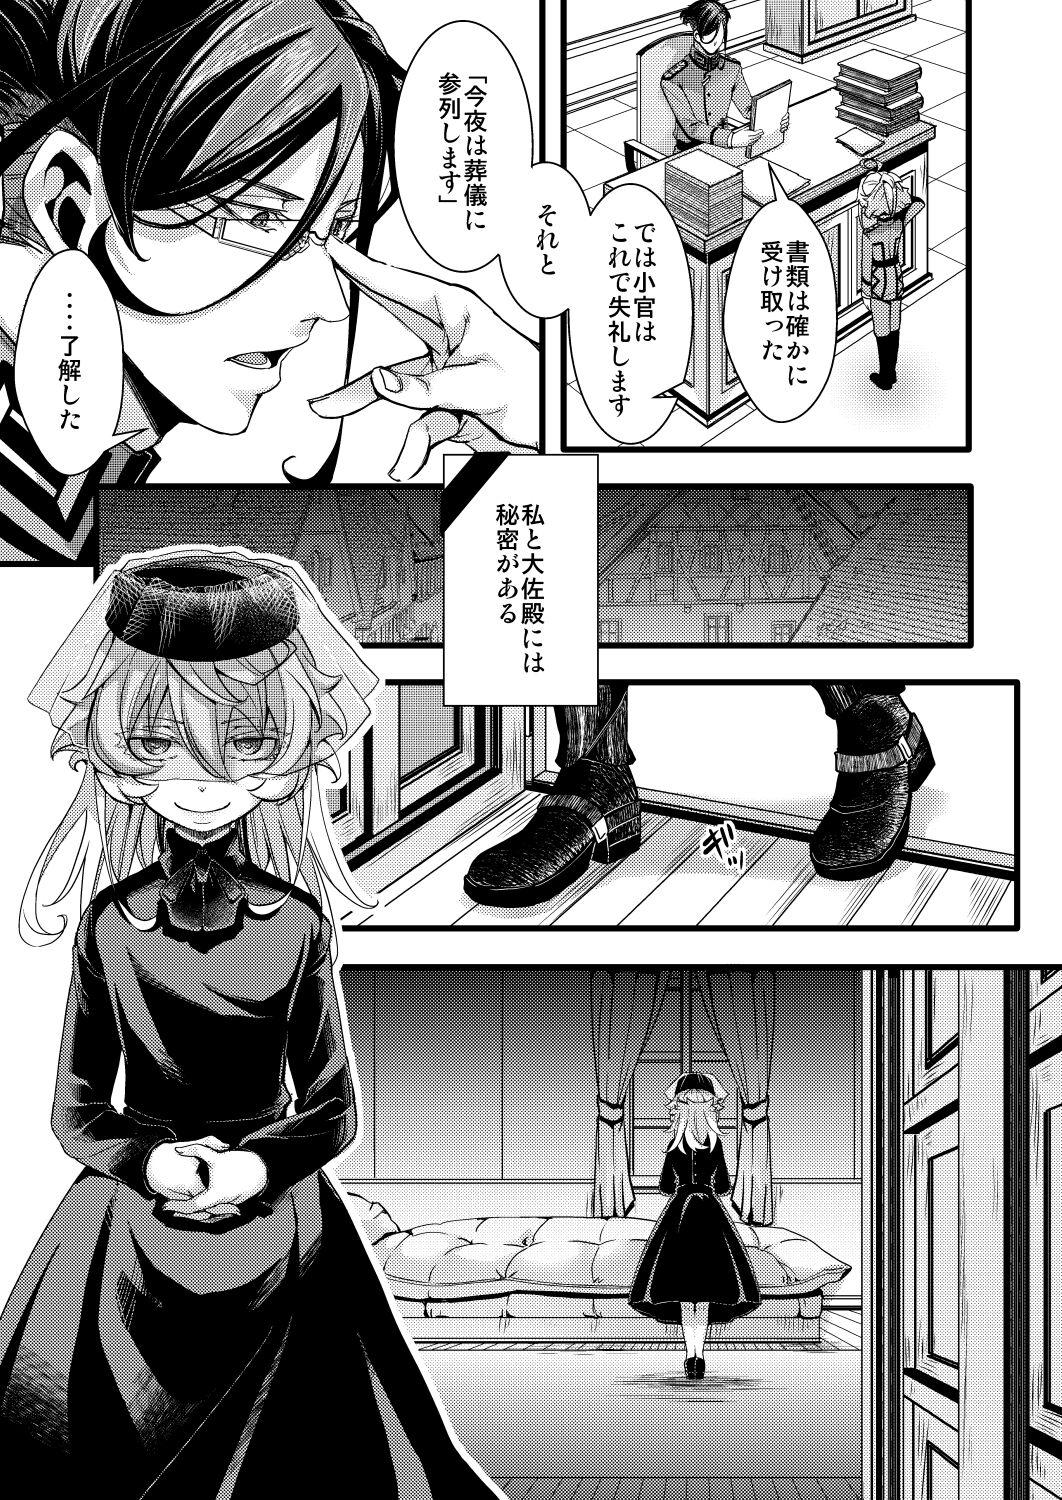 Wet Cunt Rugs - Youjo senki | saga of tanya the evil Gay Party - Page 1